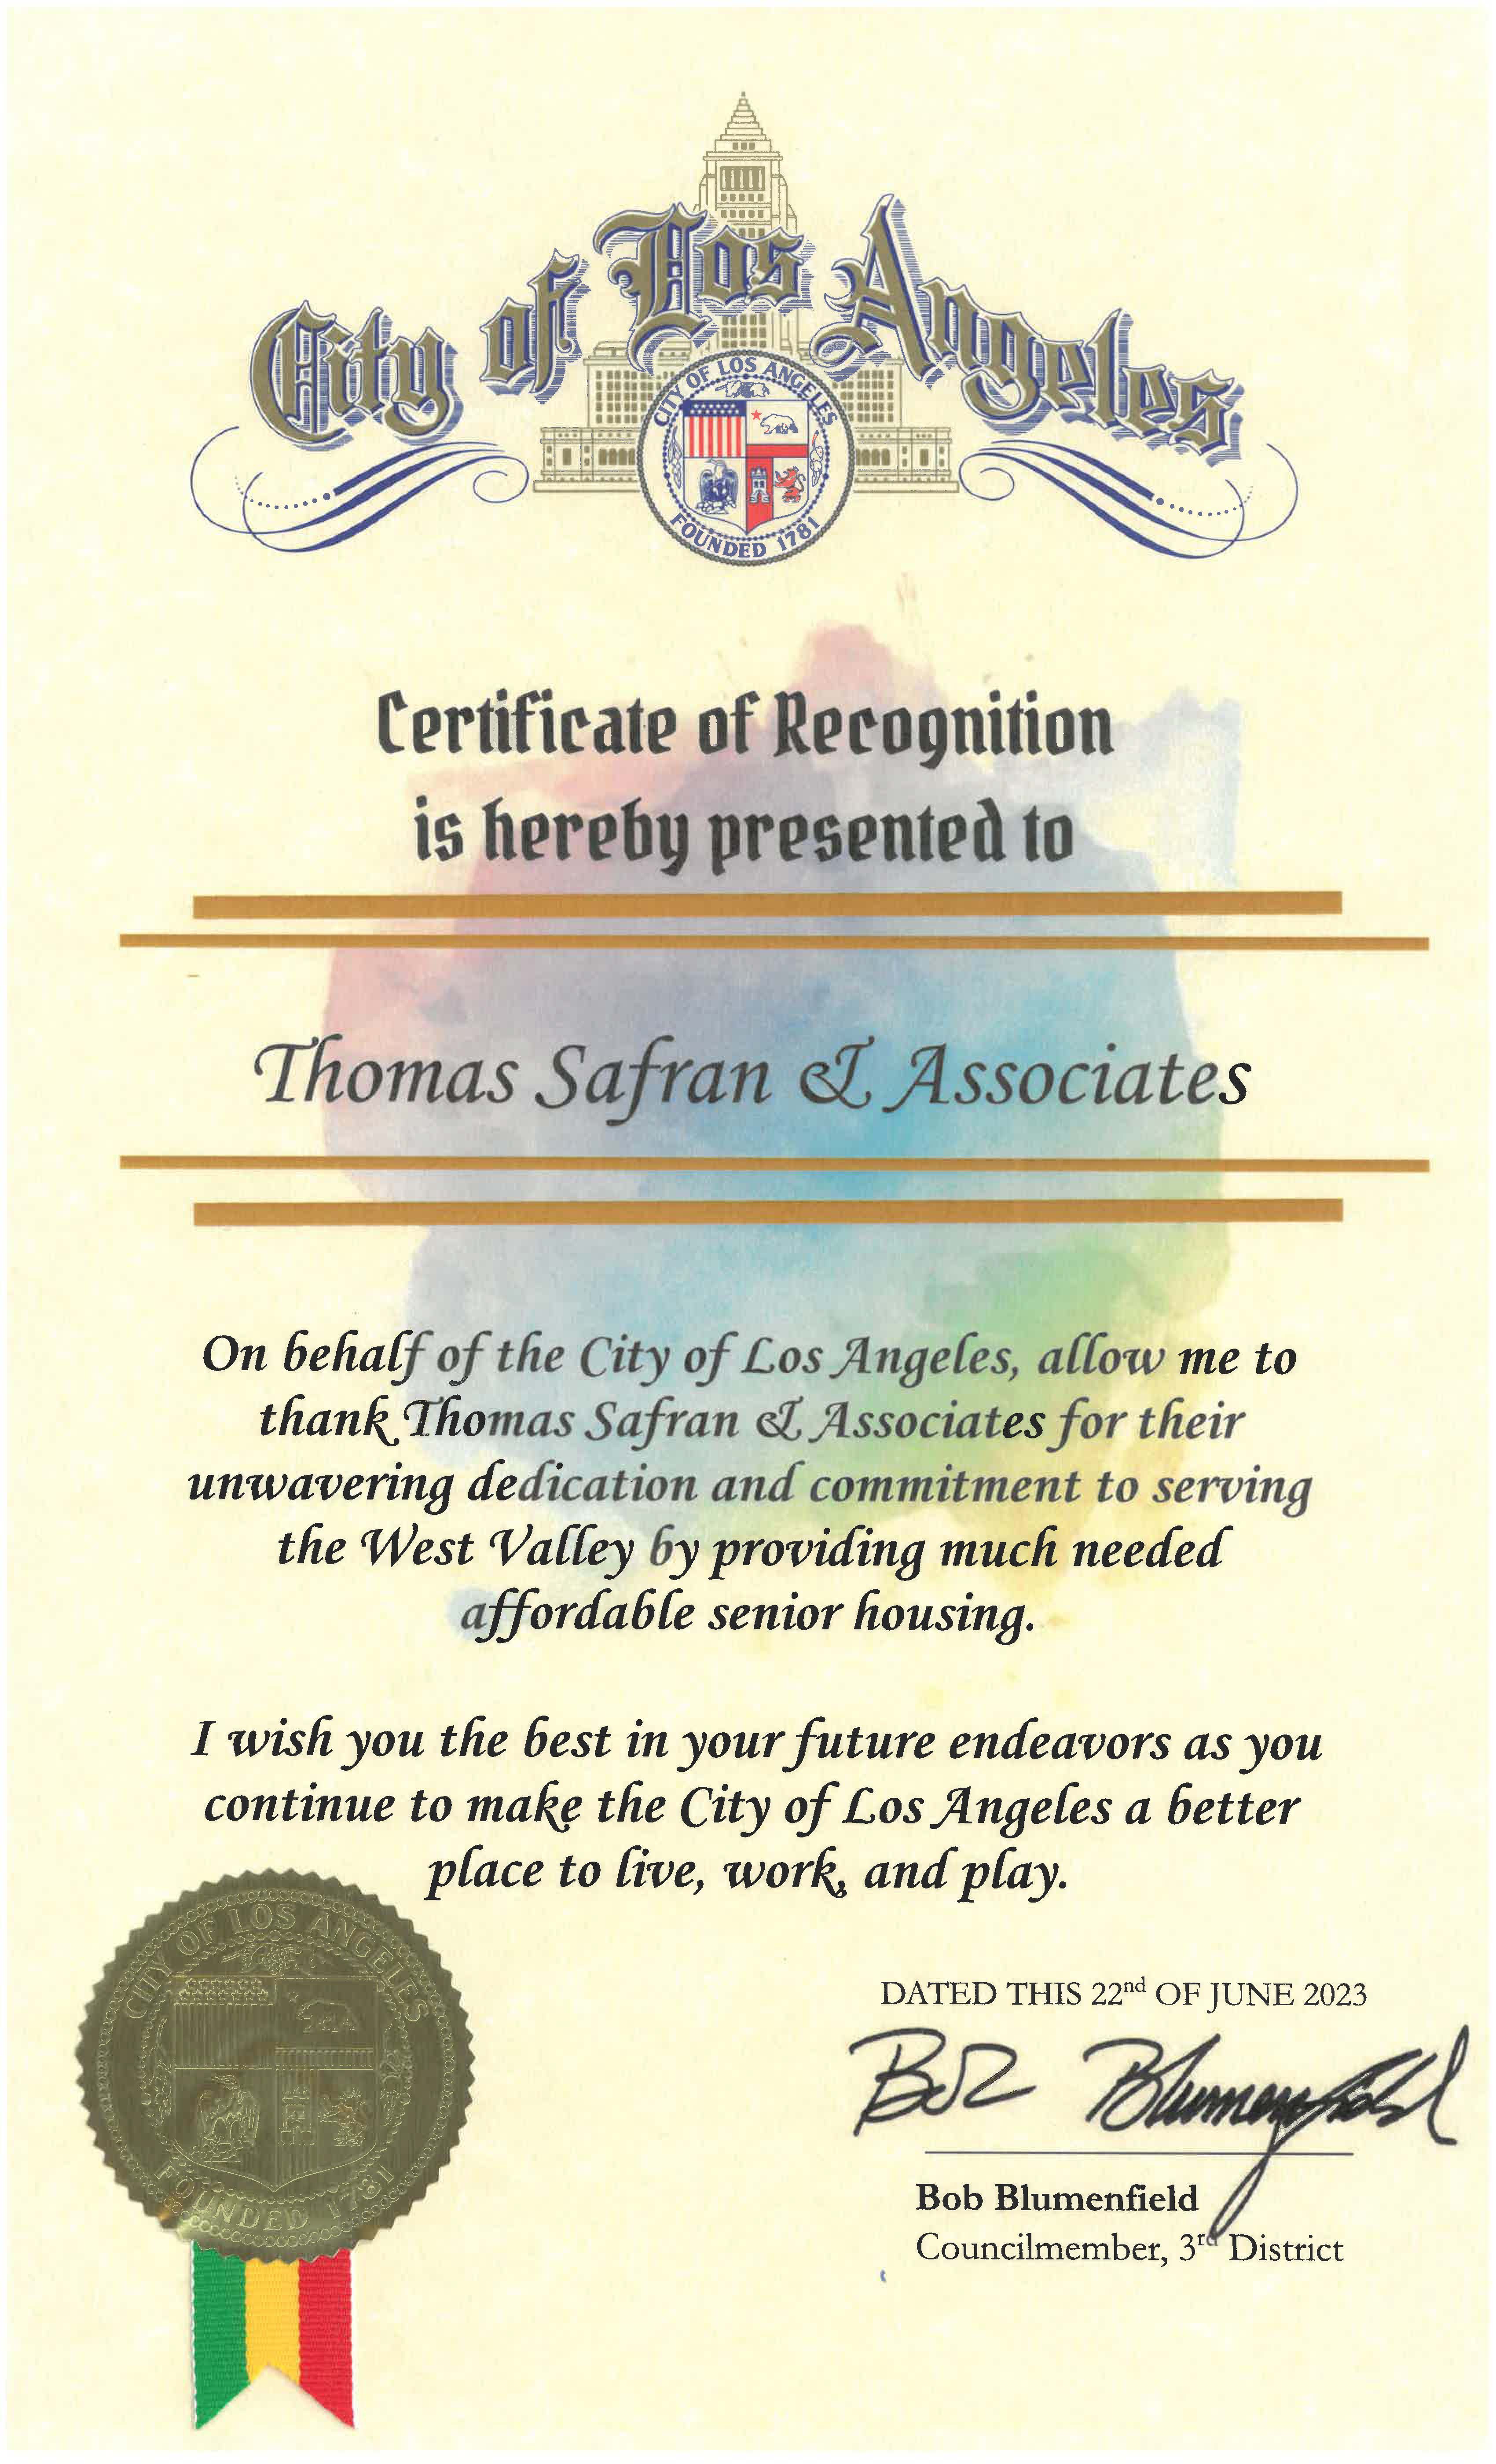 City of Los Angeles - Certificate of Recognition 2023 - 
Thomas Safran & Associates